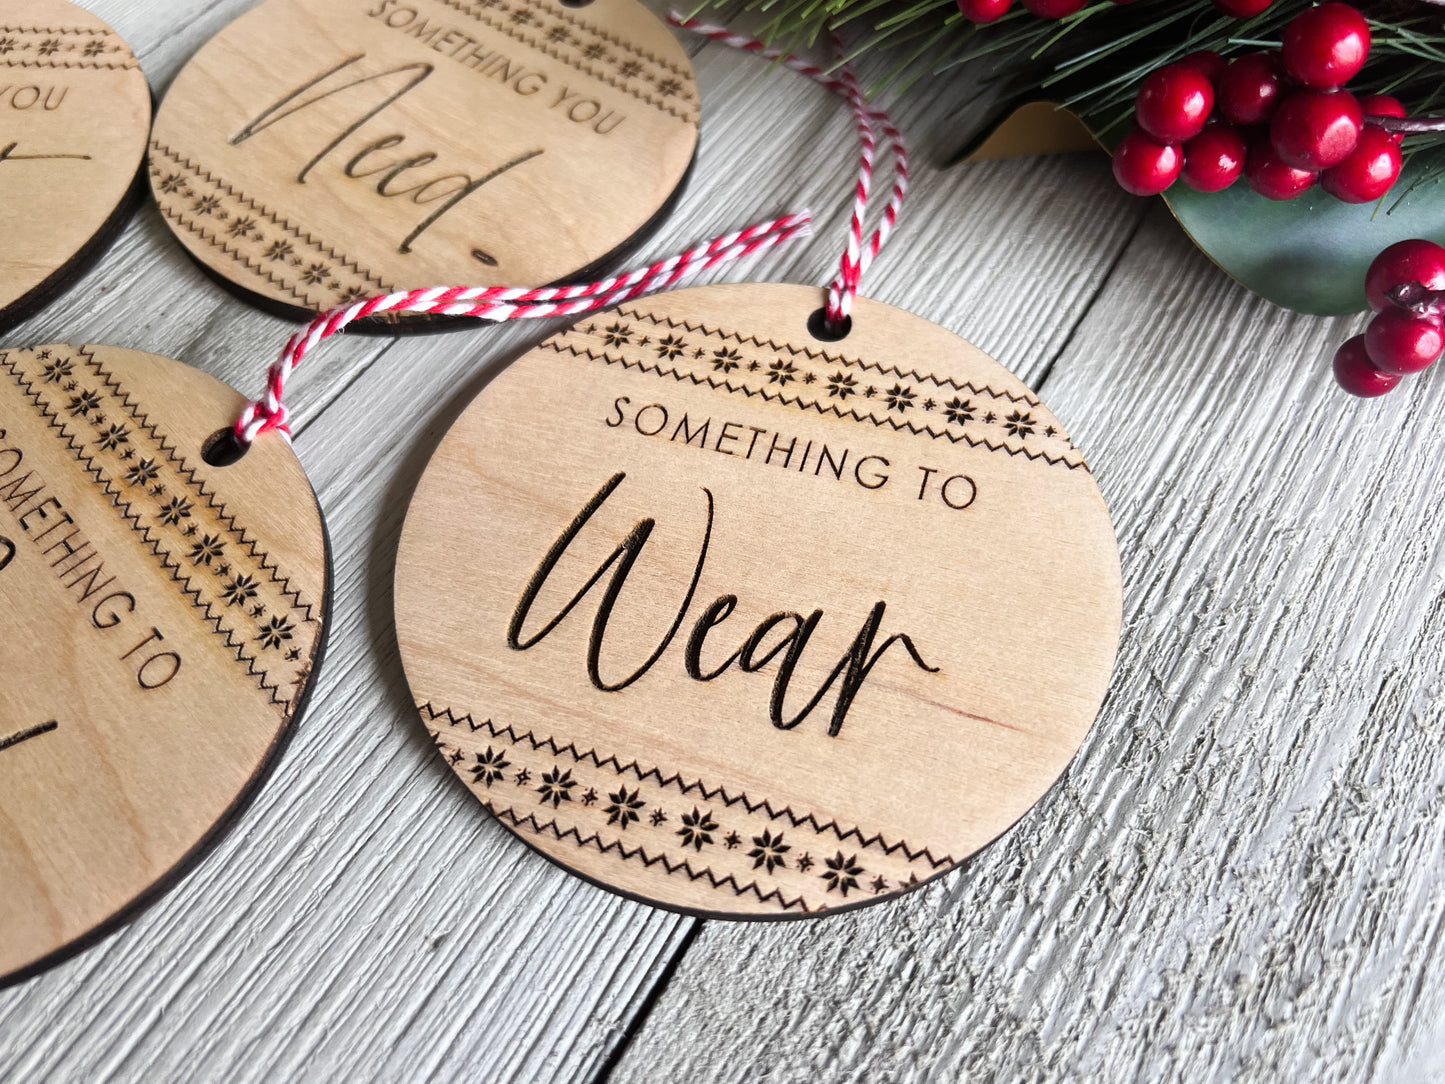 Something You Want, Need, Wear, Read Wooden Gift Tags (Set of 4)